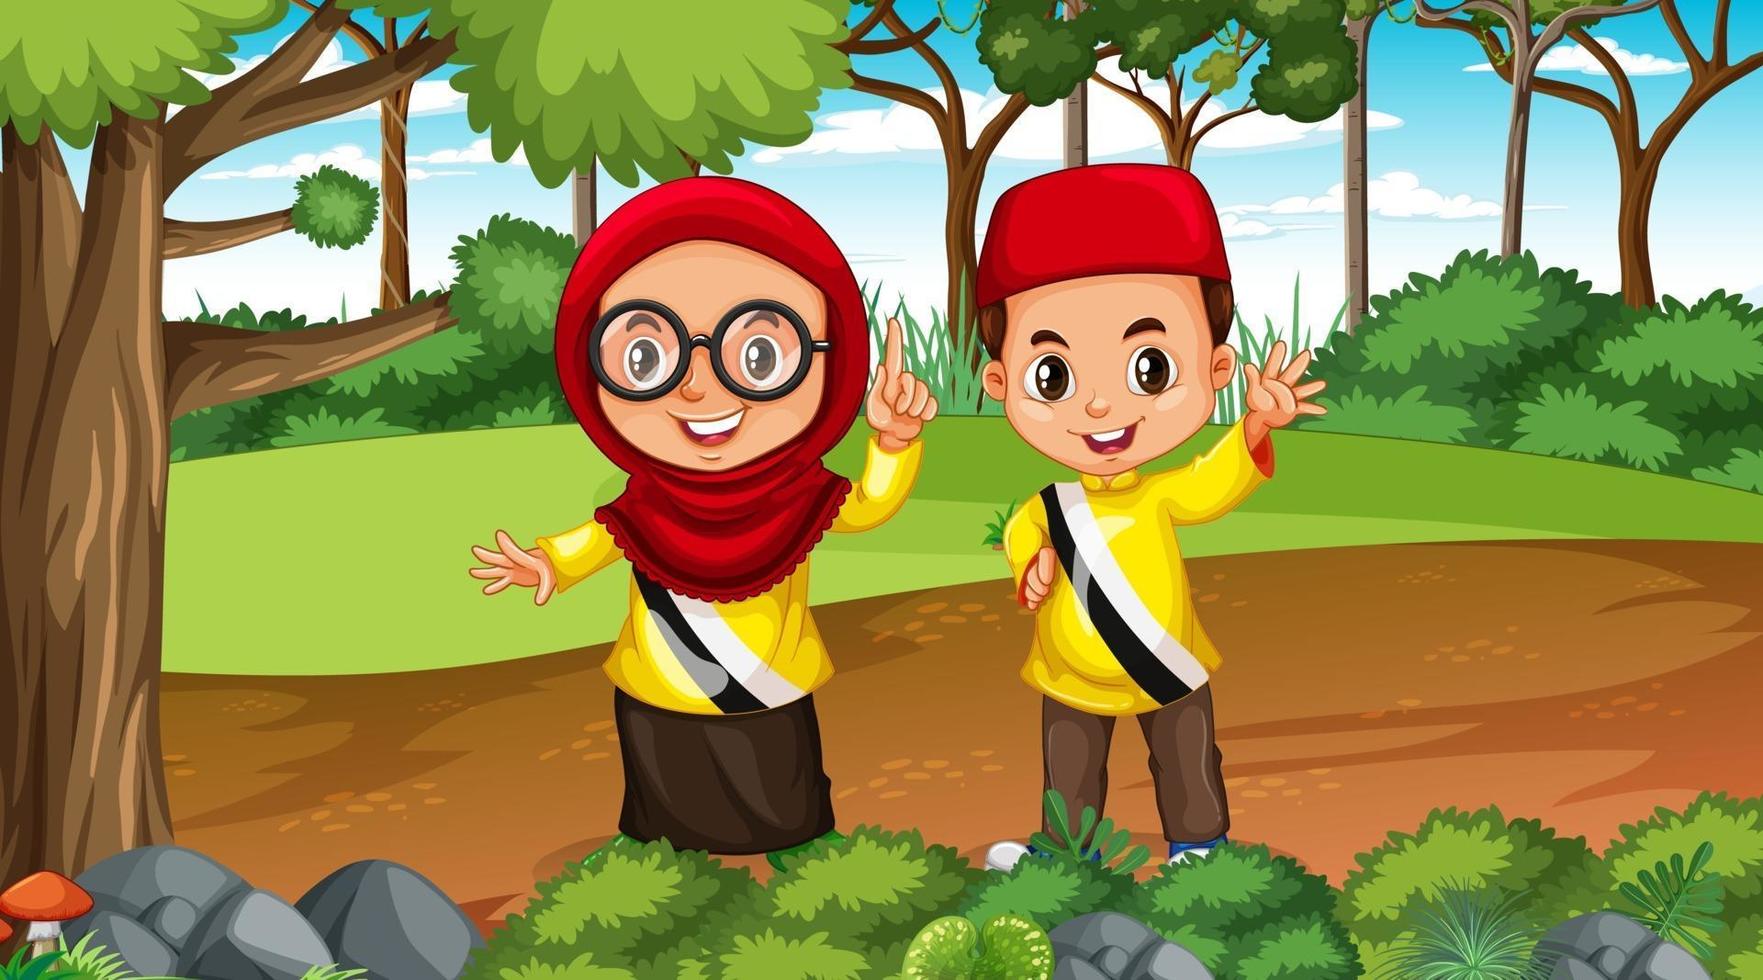 Brunei kids wears traditional clothes in the forest scene vector